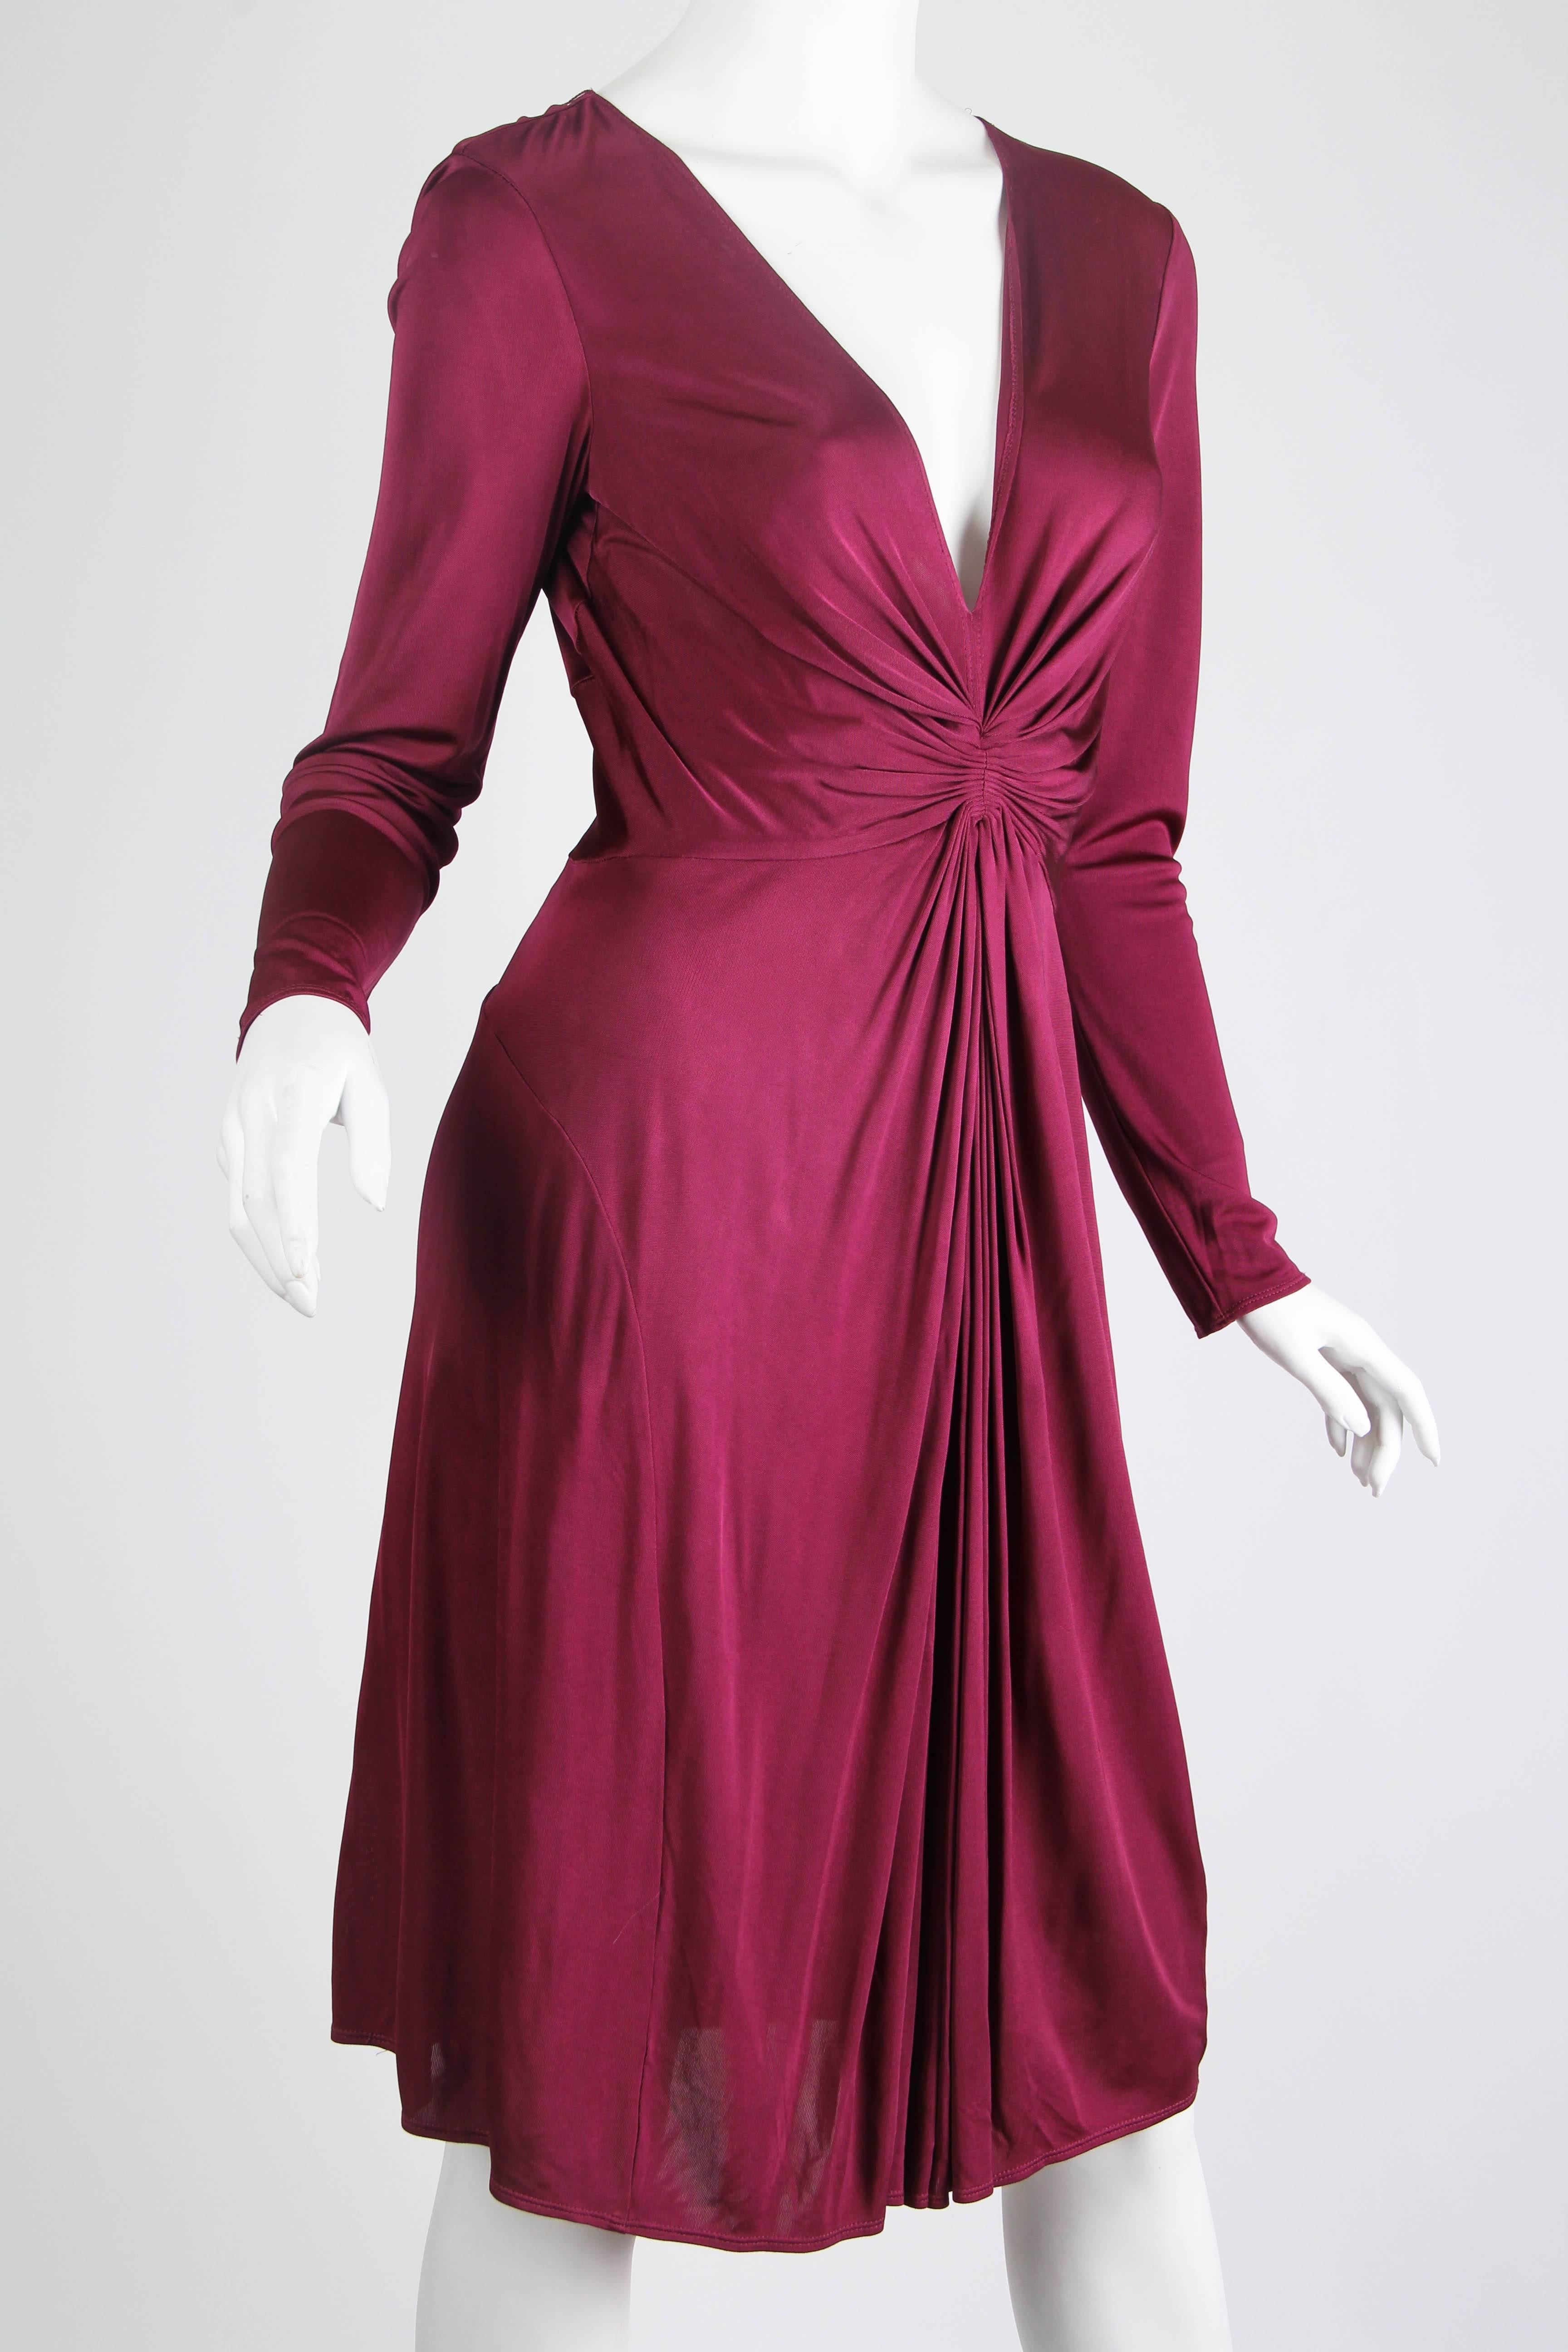 Gorgeous body flowing and flattering cut to this luscious dress from none other than Alexander McQueen. 